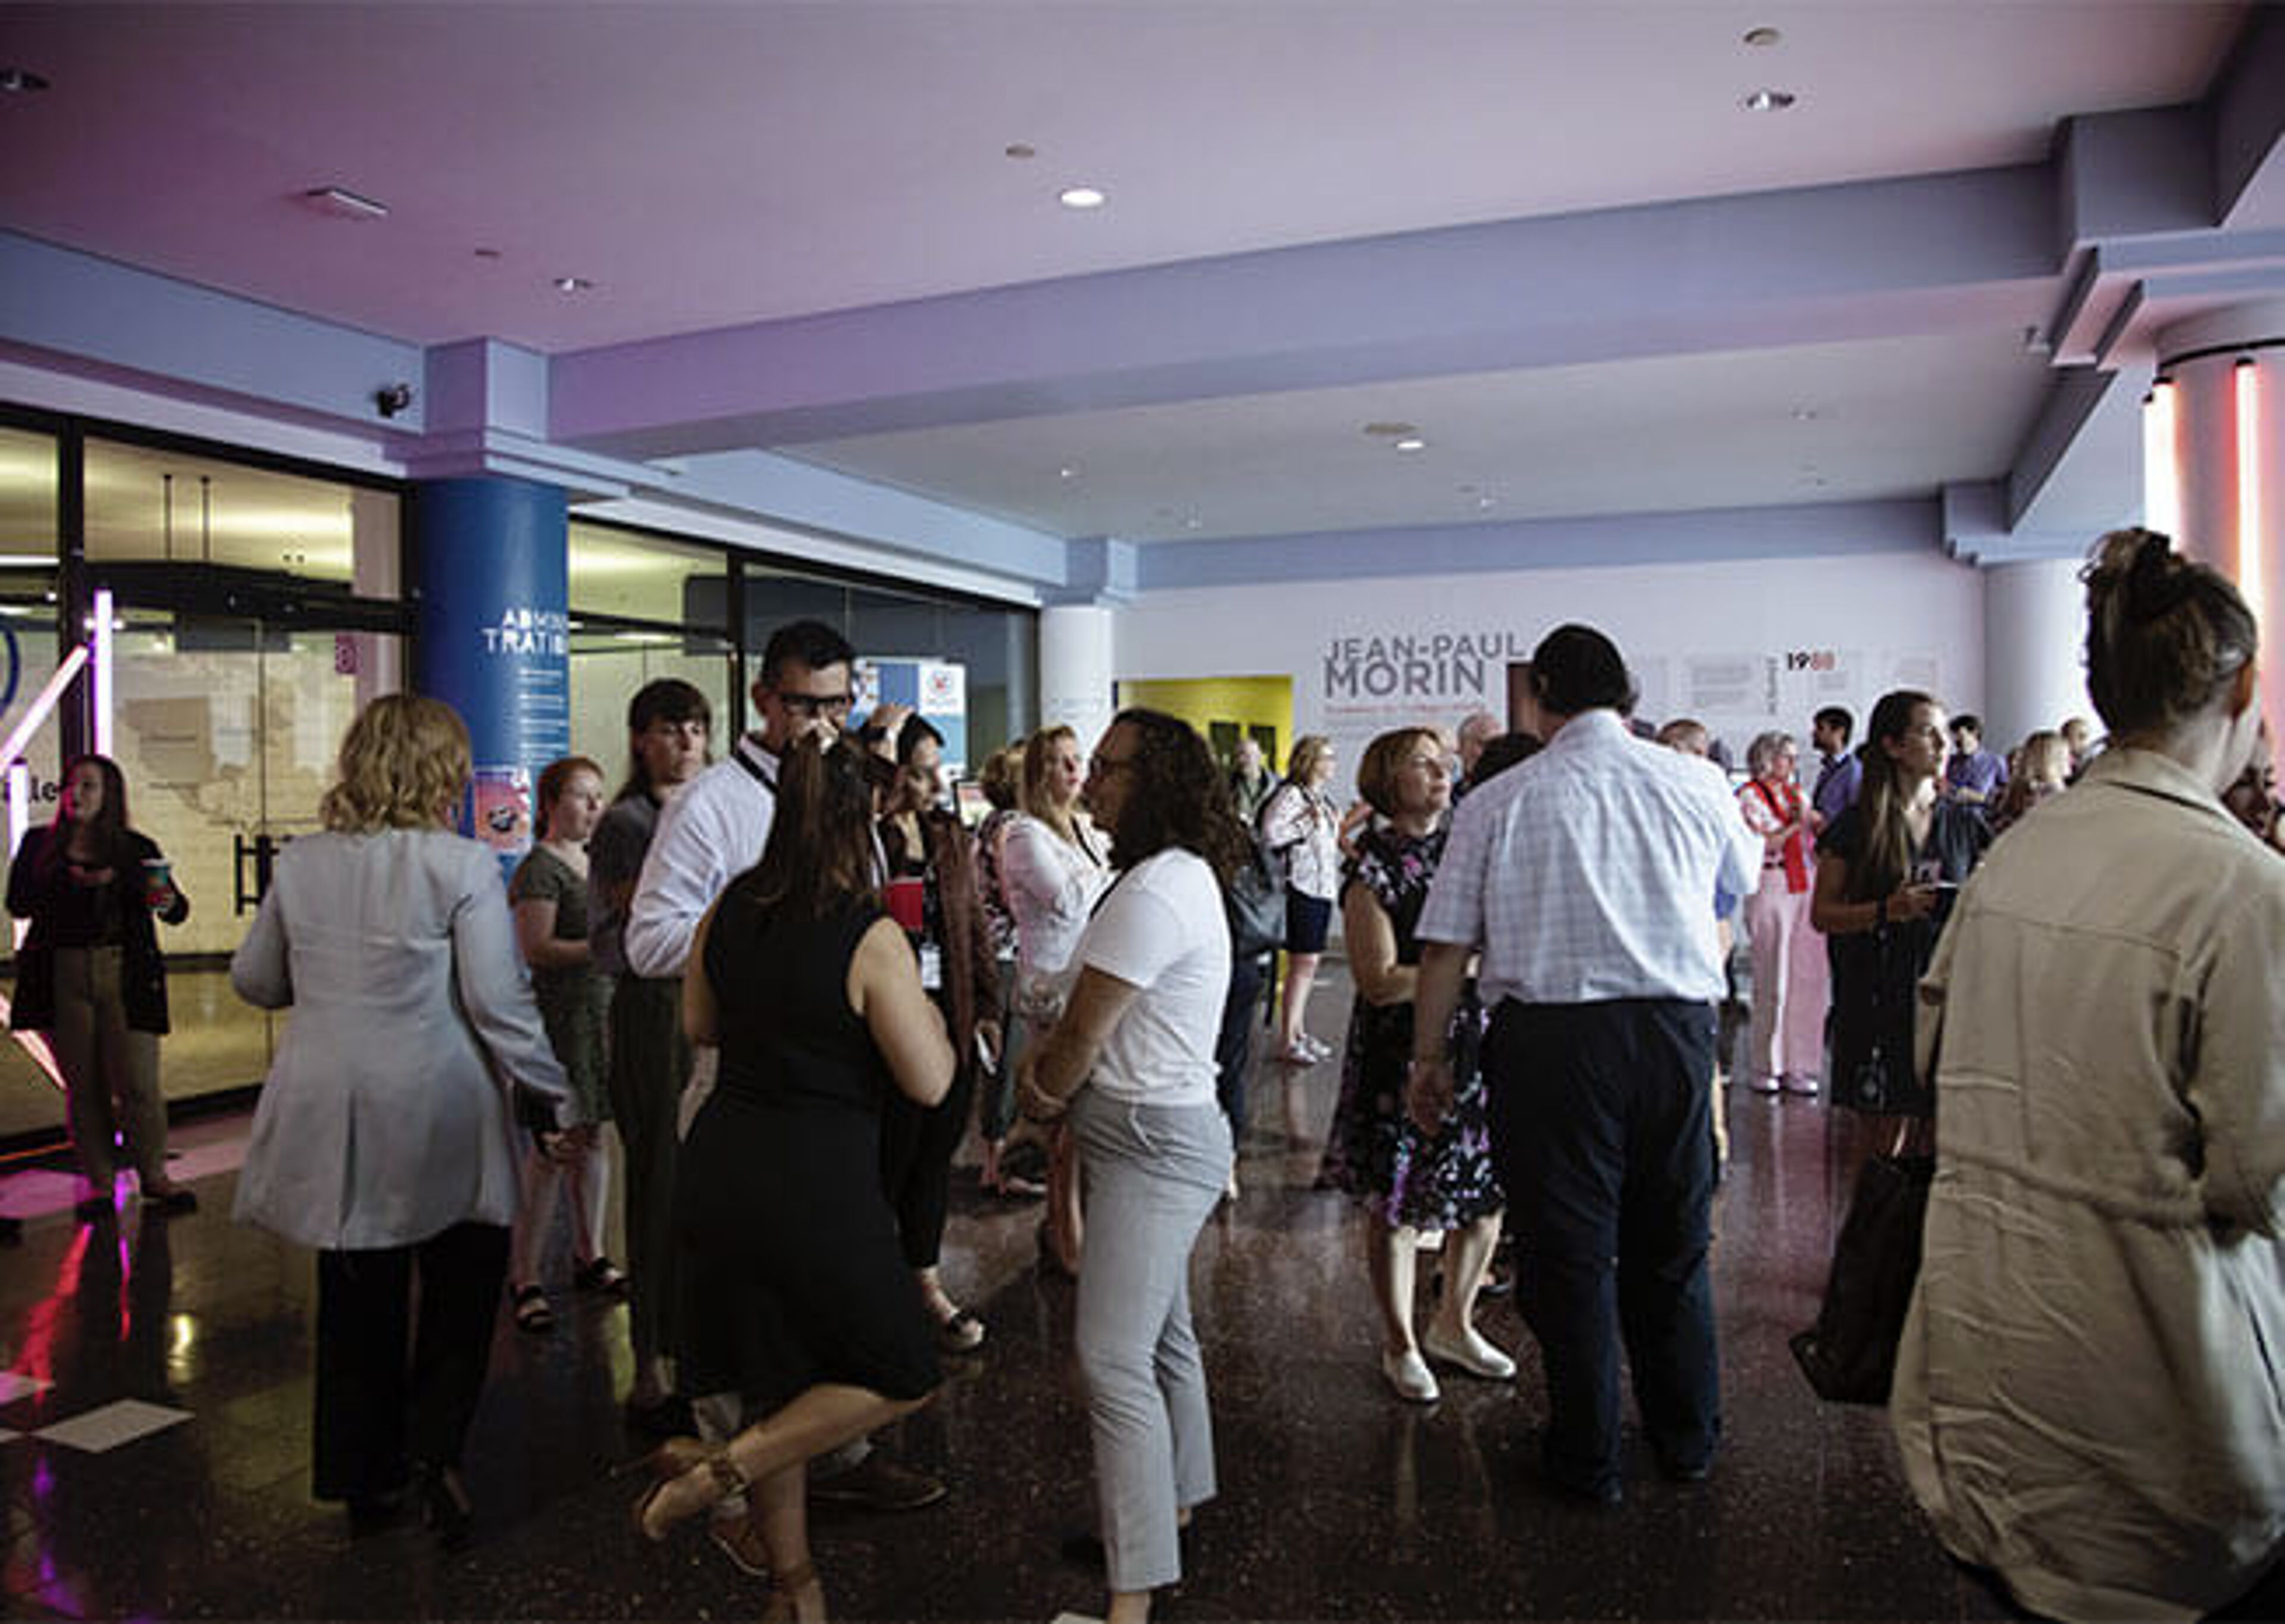 Attendees at a conference mingle during a break in the lobby area, engaging in professional networking.